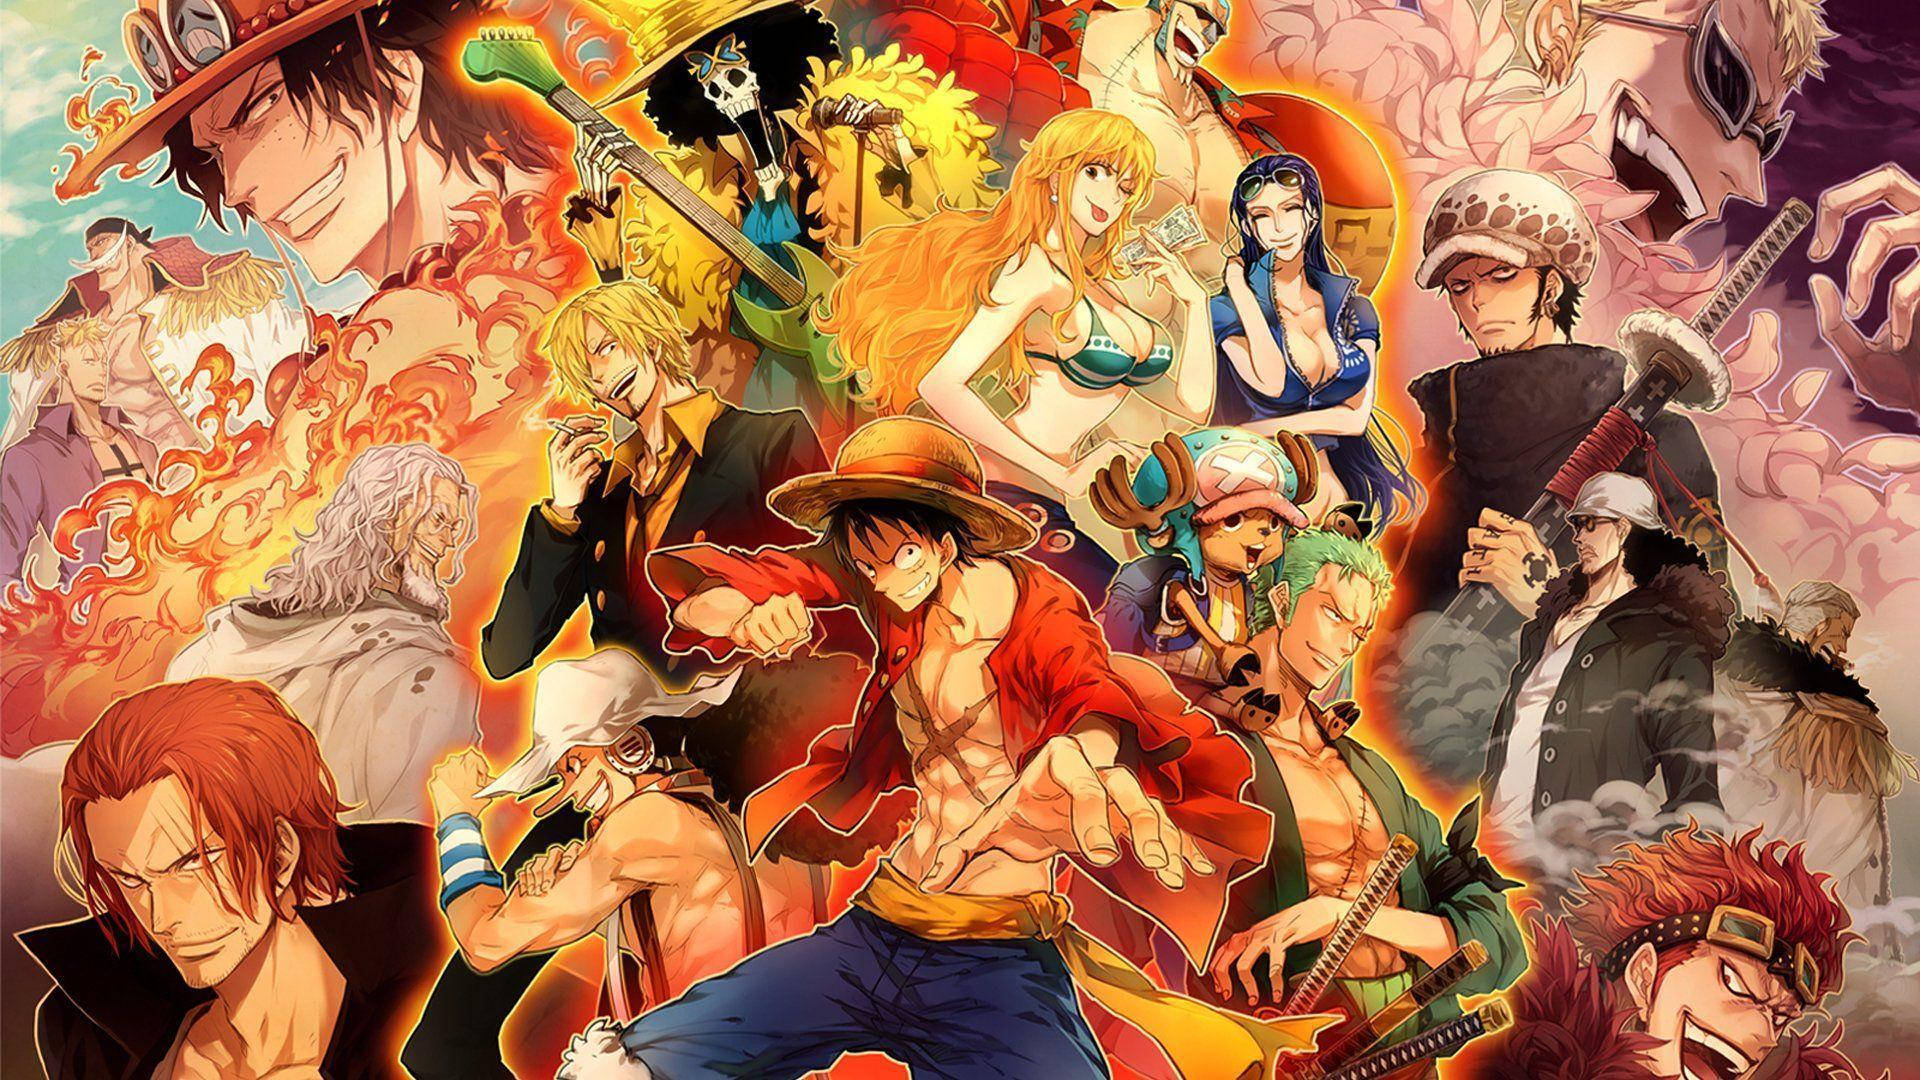 Free One Piece Live Wallpaper Downloads, [100+] One Piece Live Wallpapers  for FREE 